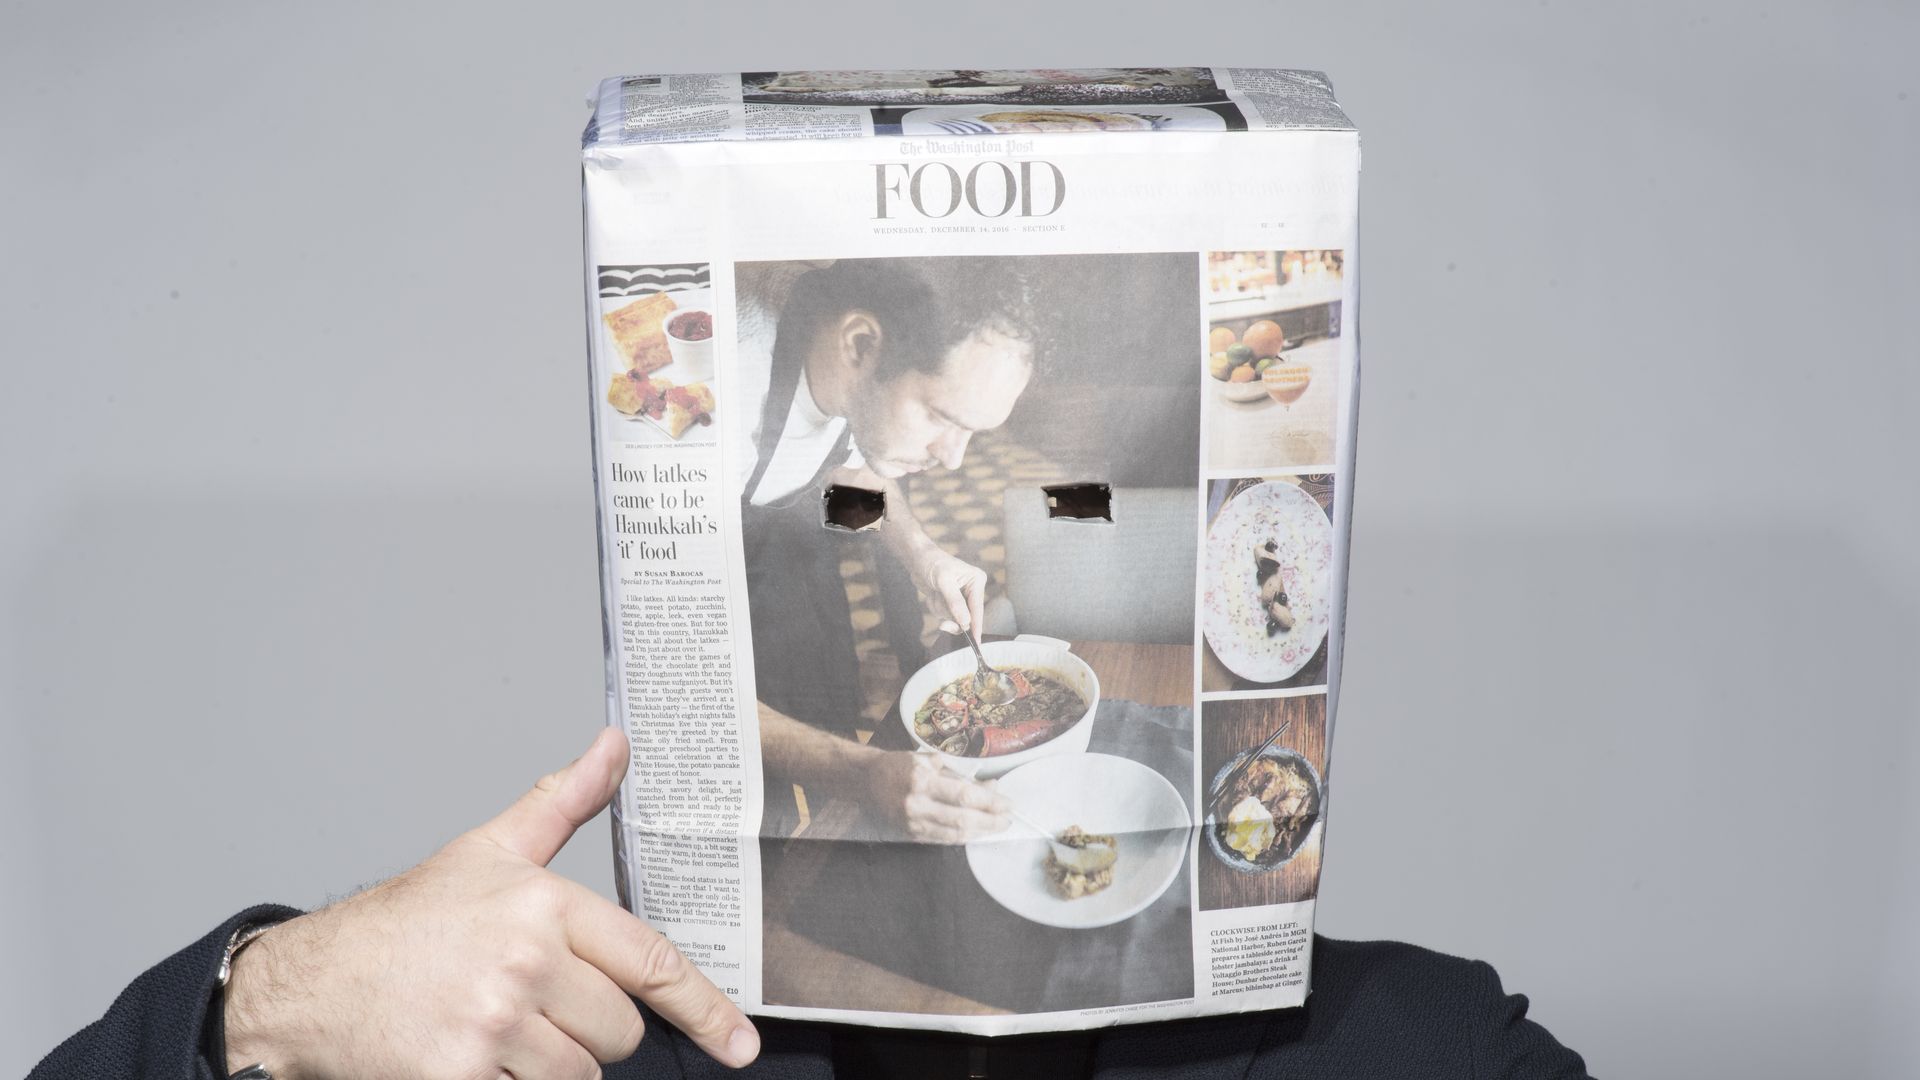 Tom Sietsema poses with a print newspaper box over his head to shield his identity